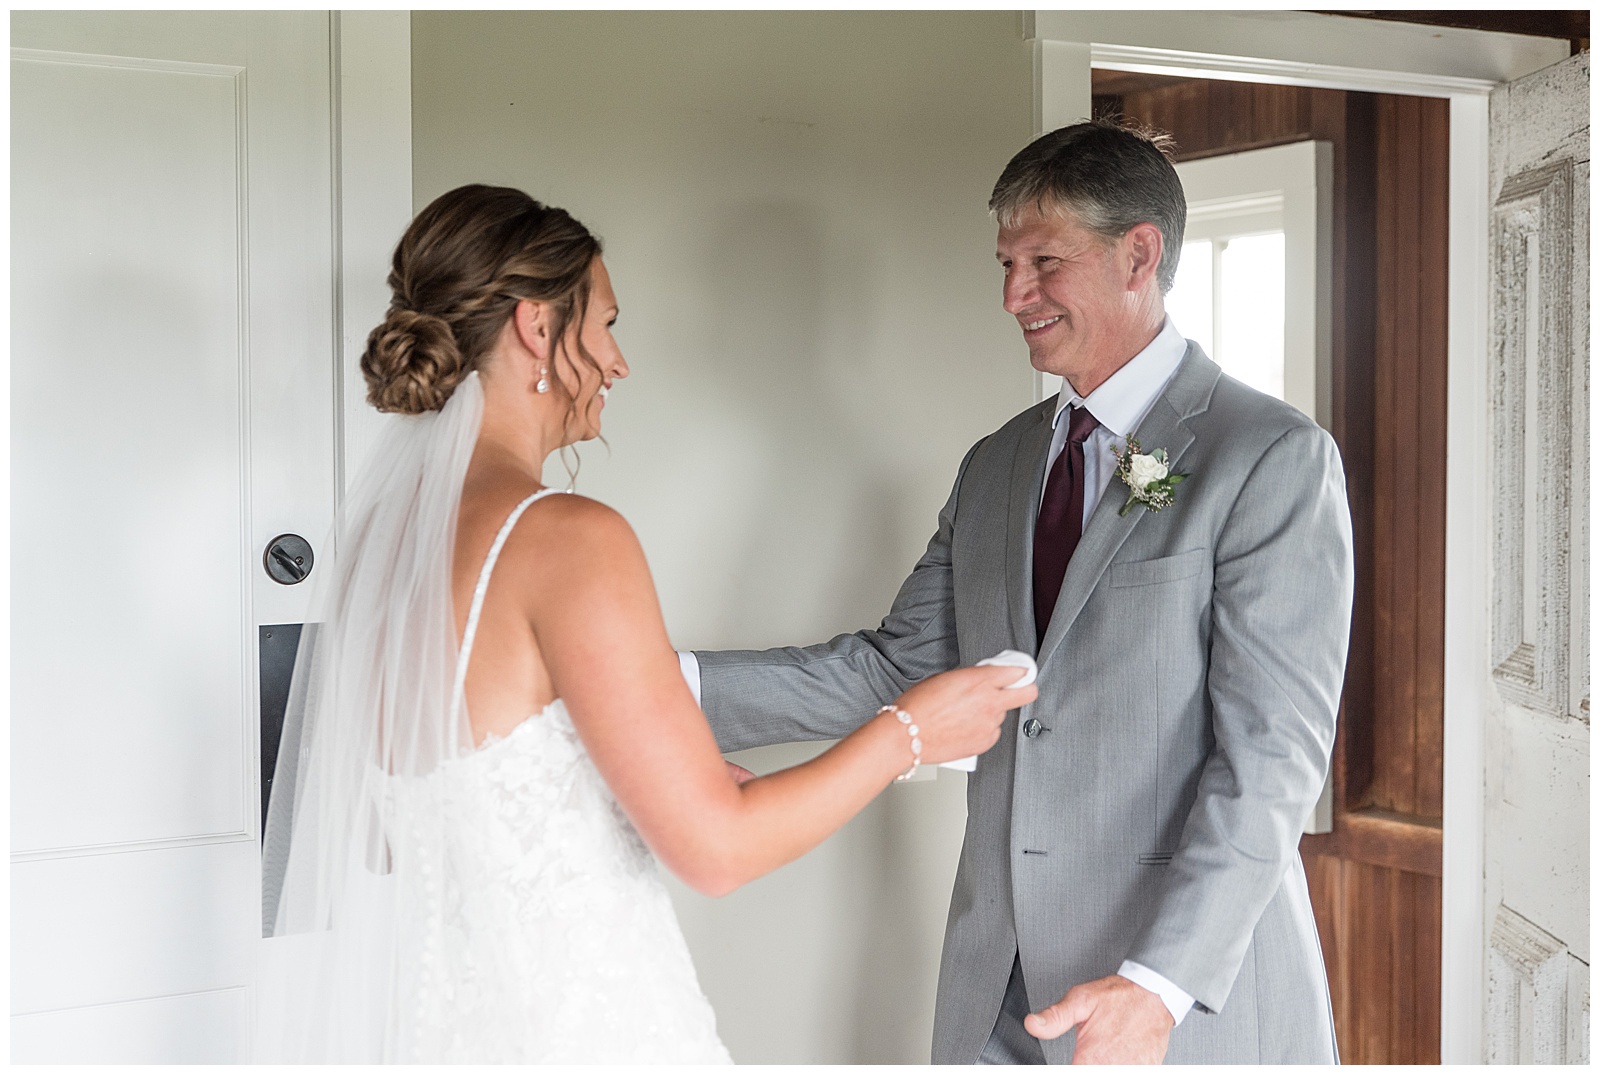 bride sharing a first look moment with her dad inside bridal suite at lakefield weddings in manheim pennsylvania